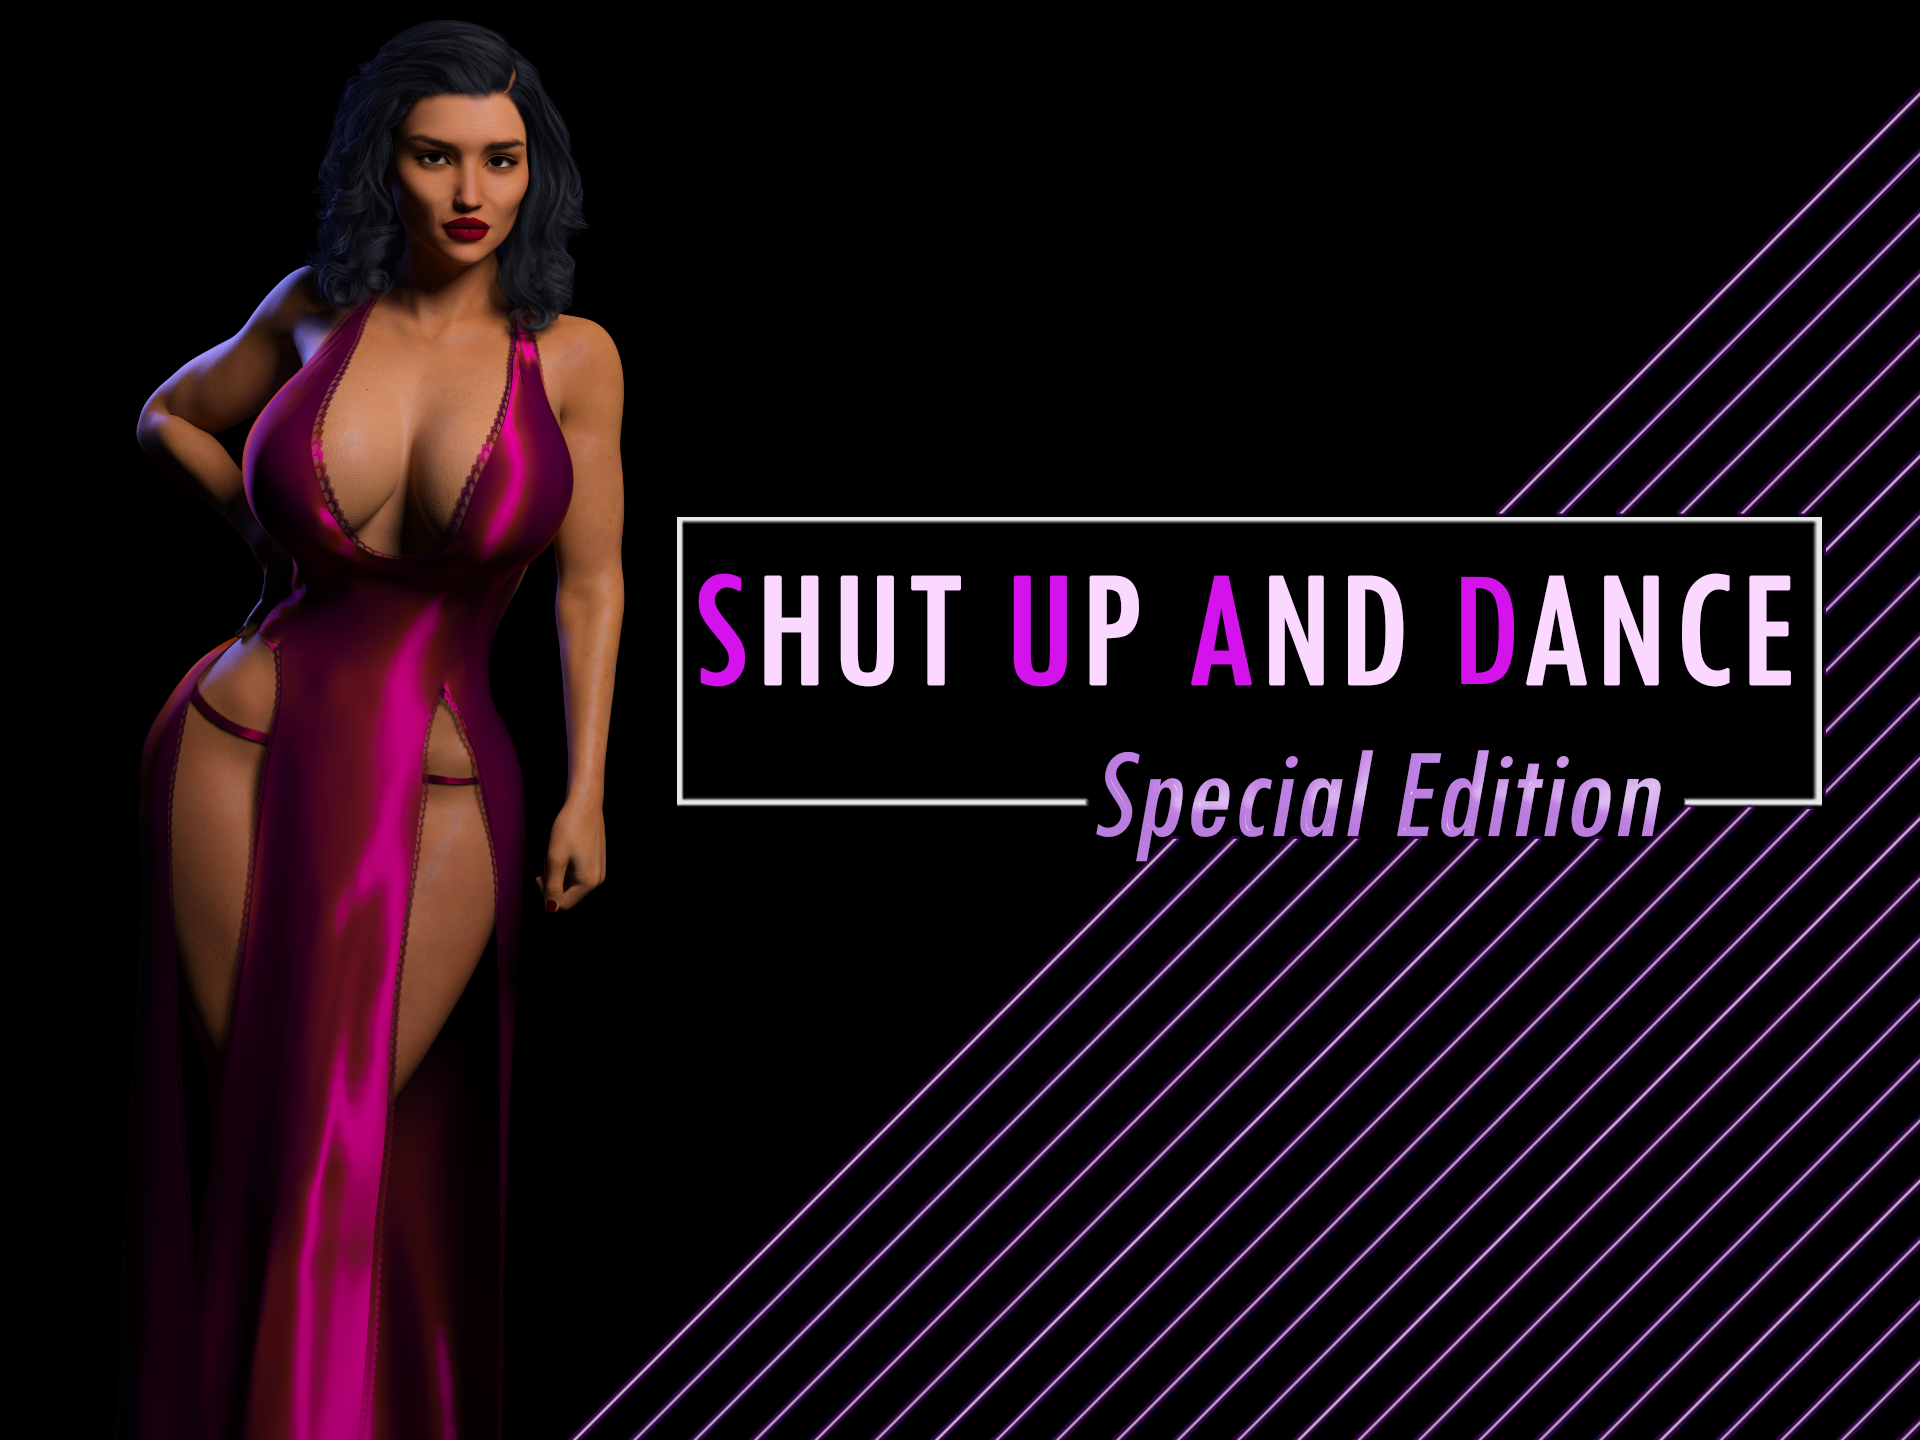 Shut Up and Dance: Special Edition (Episodes 1-9)